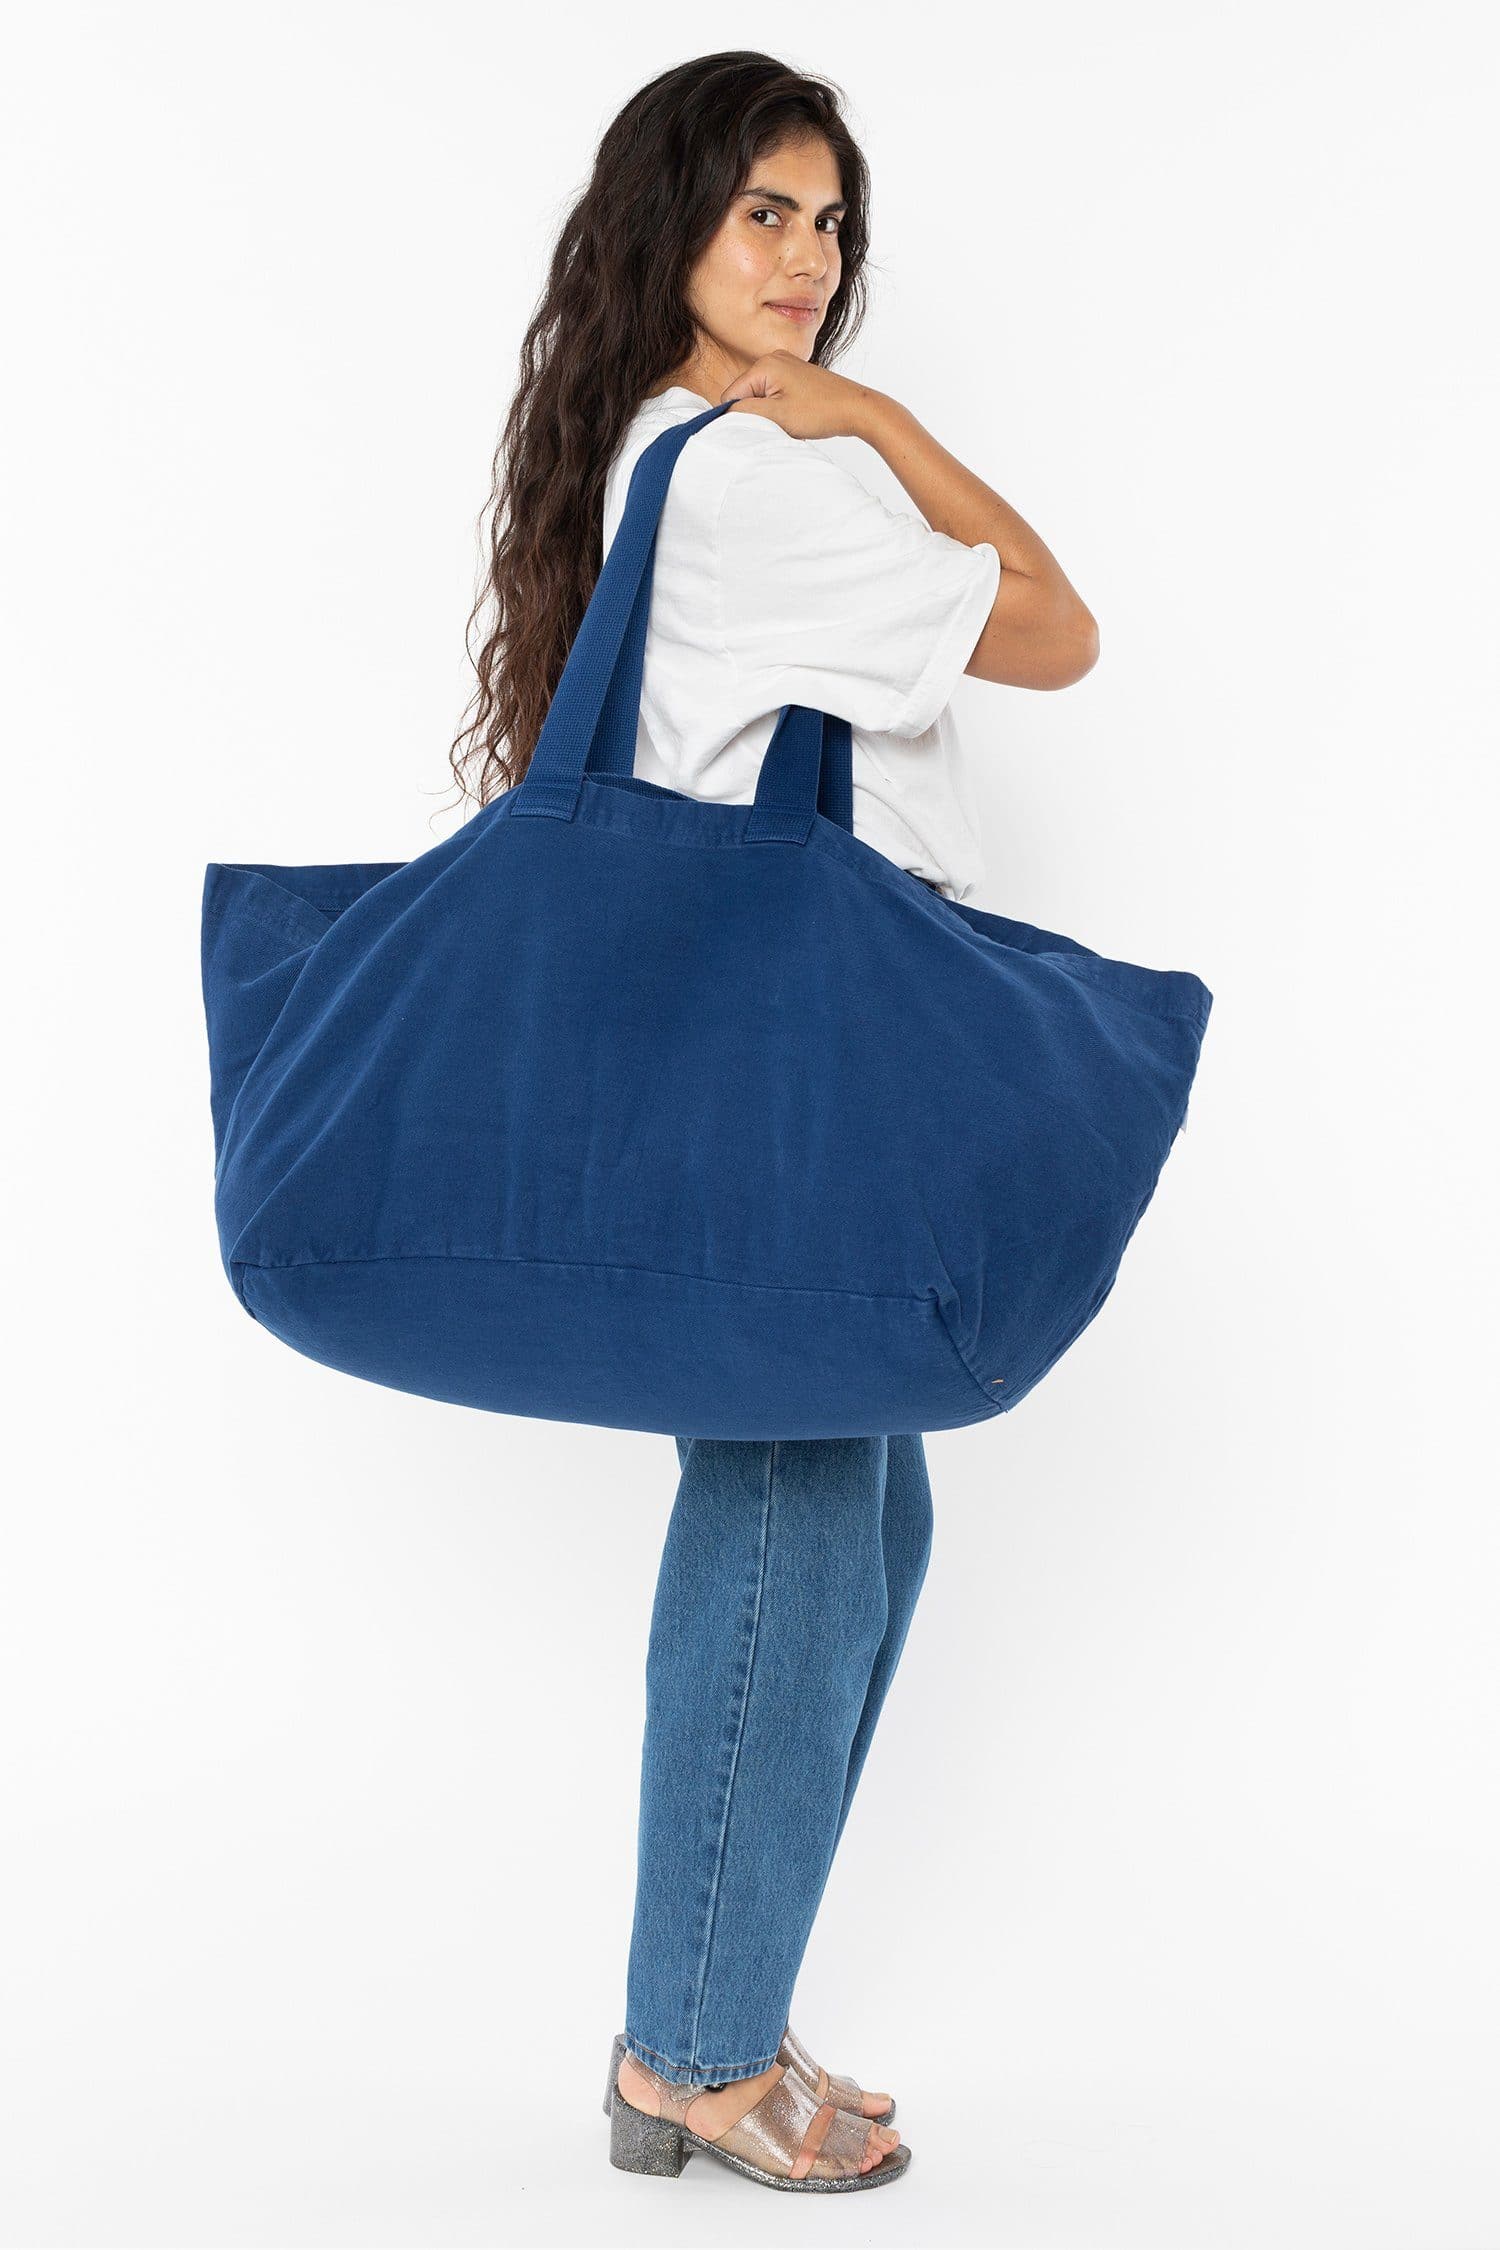 The Oversized Bag Is Back. Shop 12 Roomy Styles - Parade